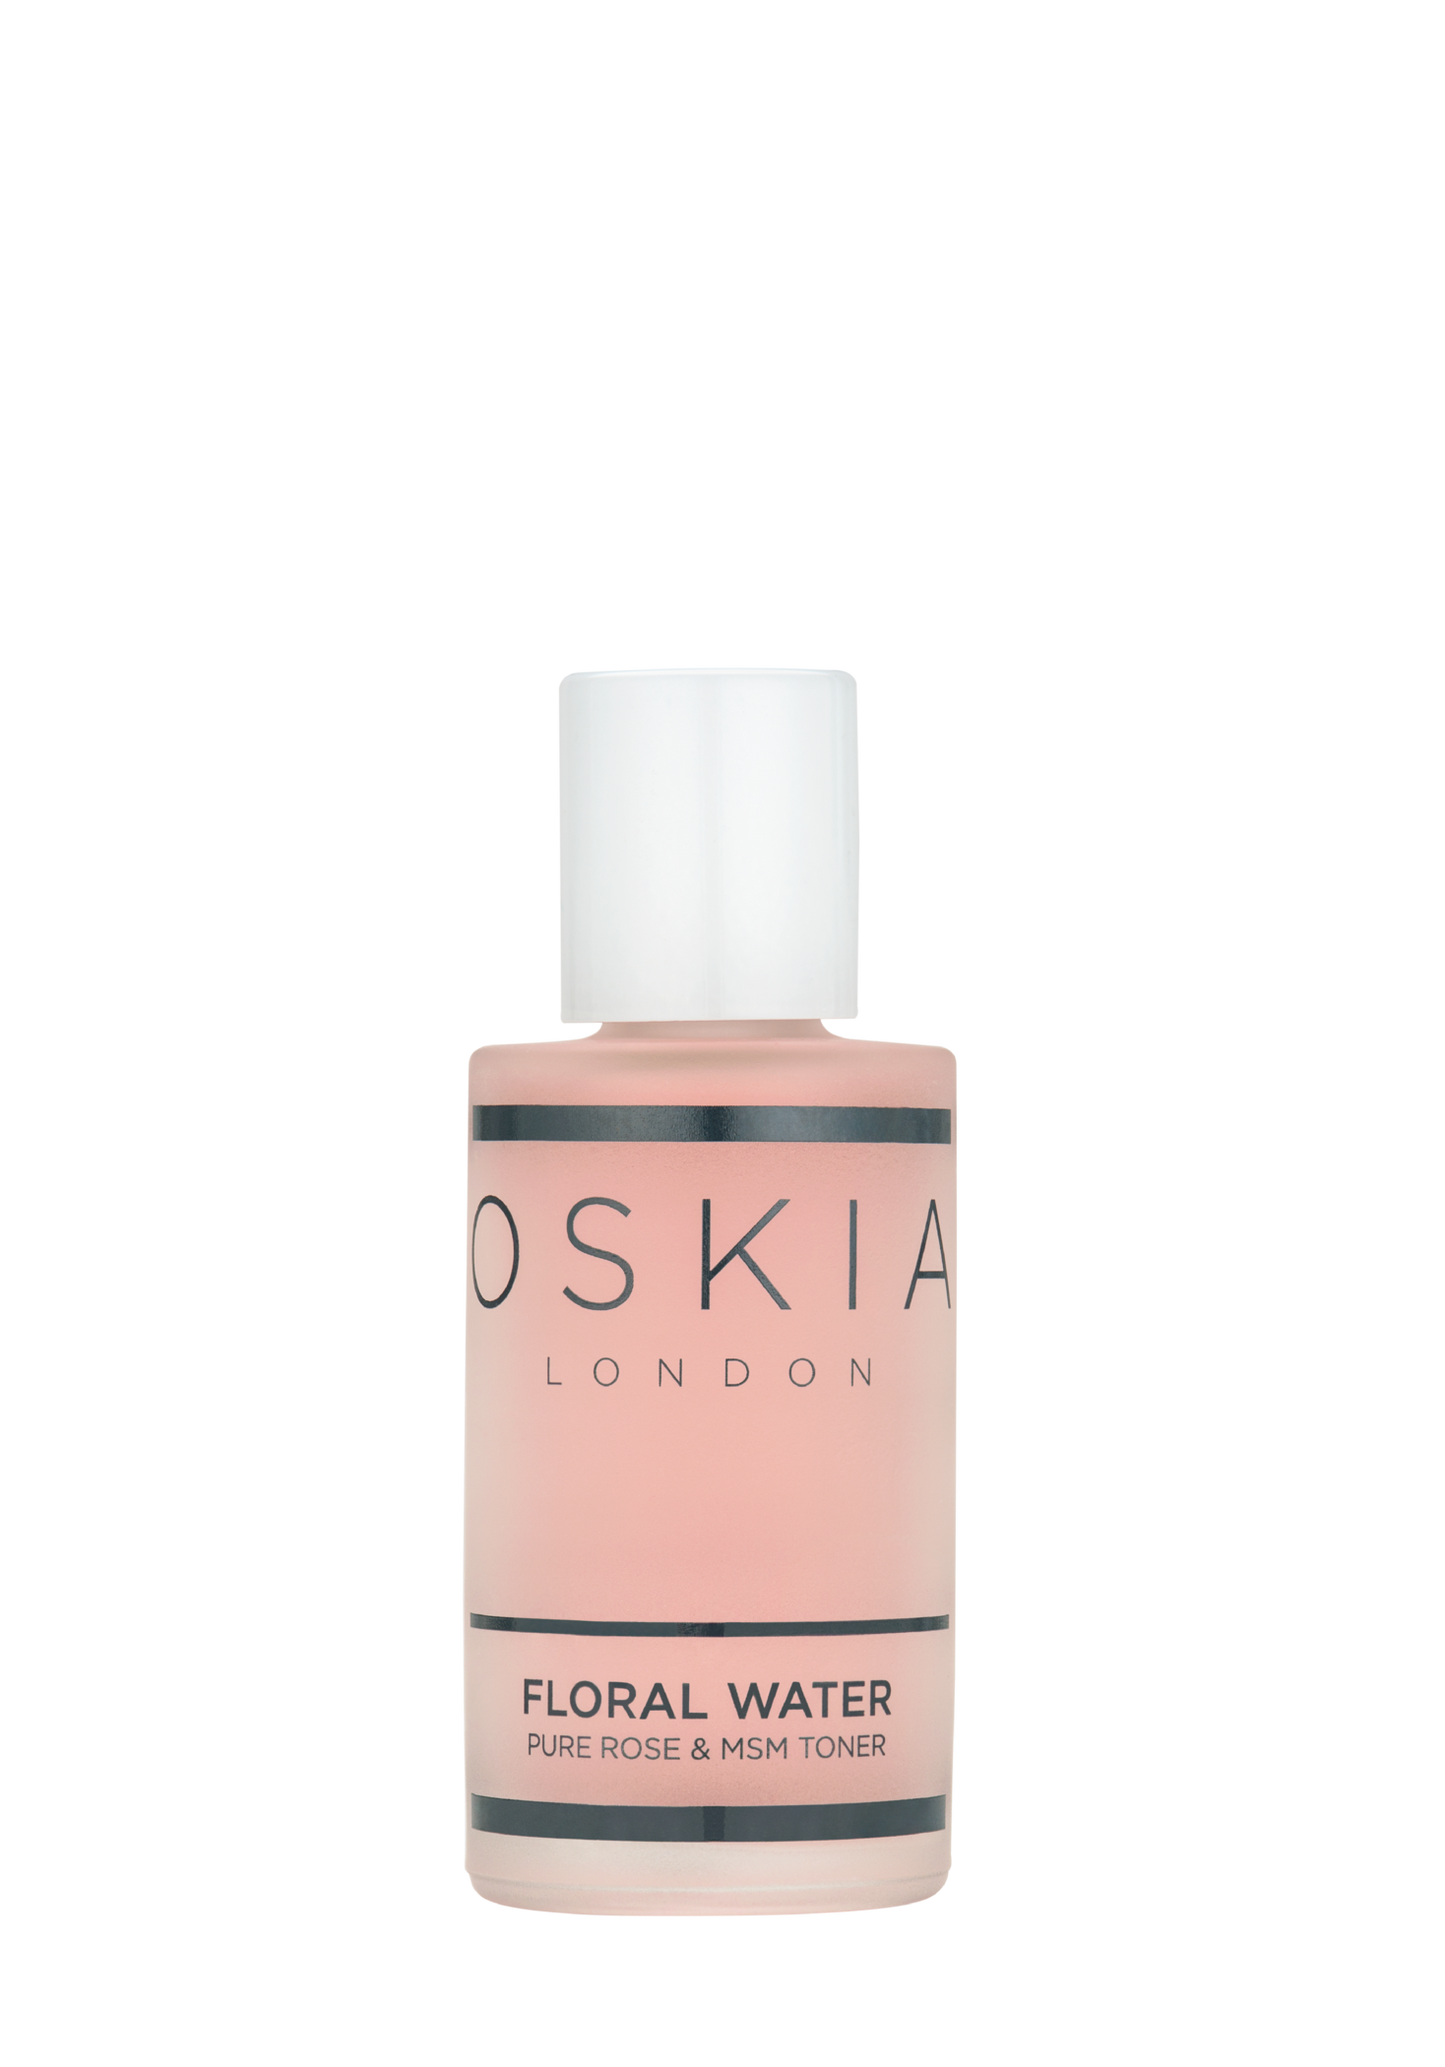 Floral Water Travel Size 30ml